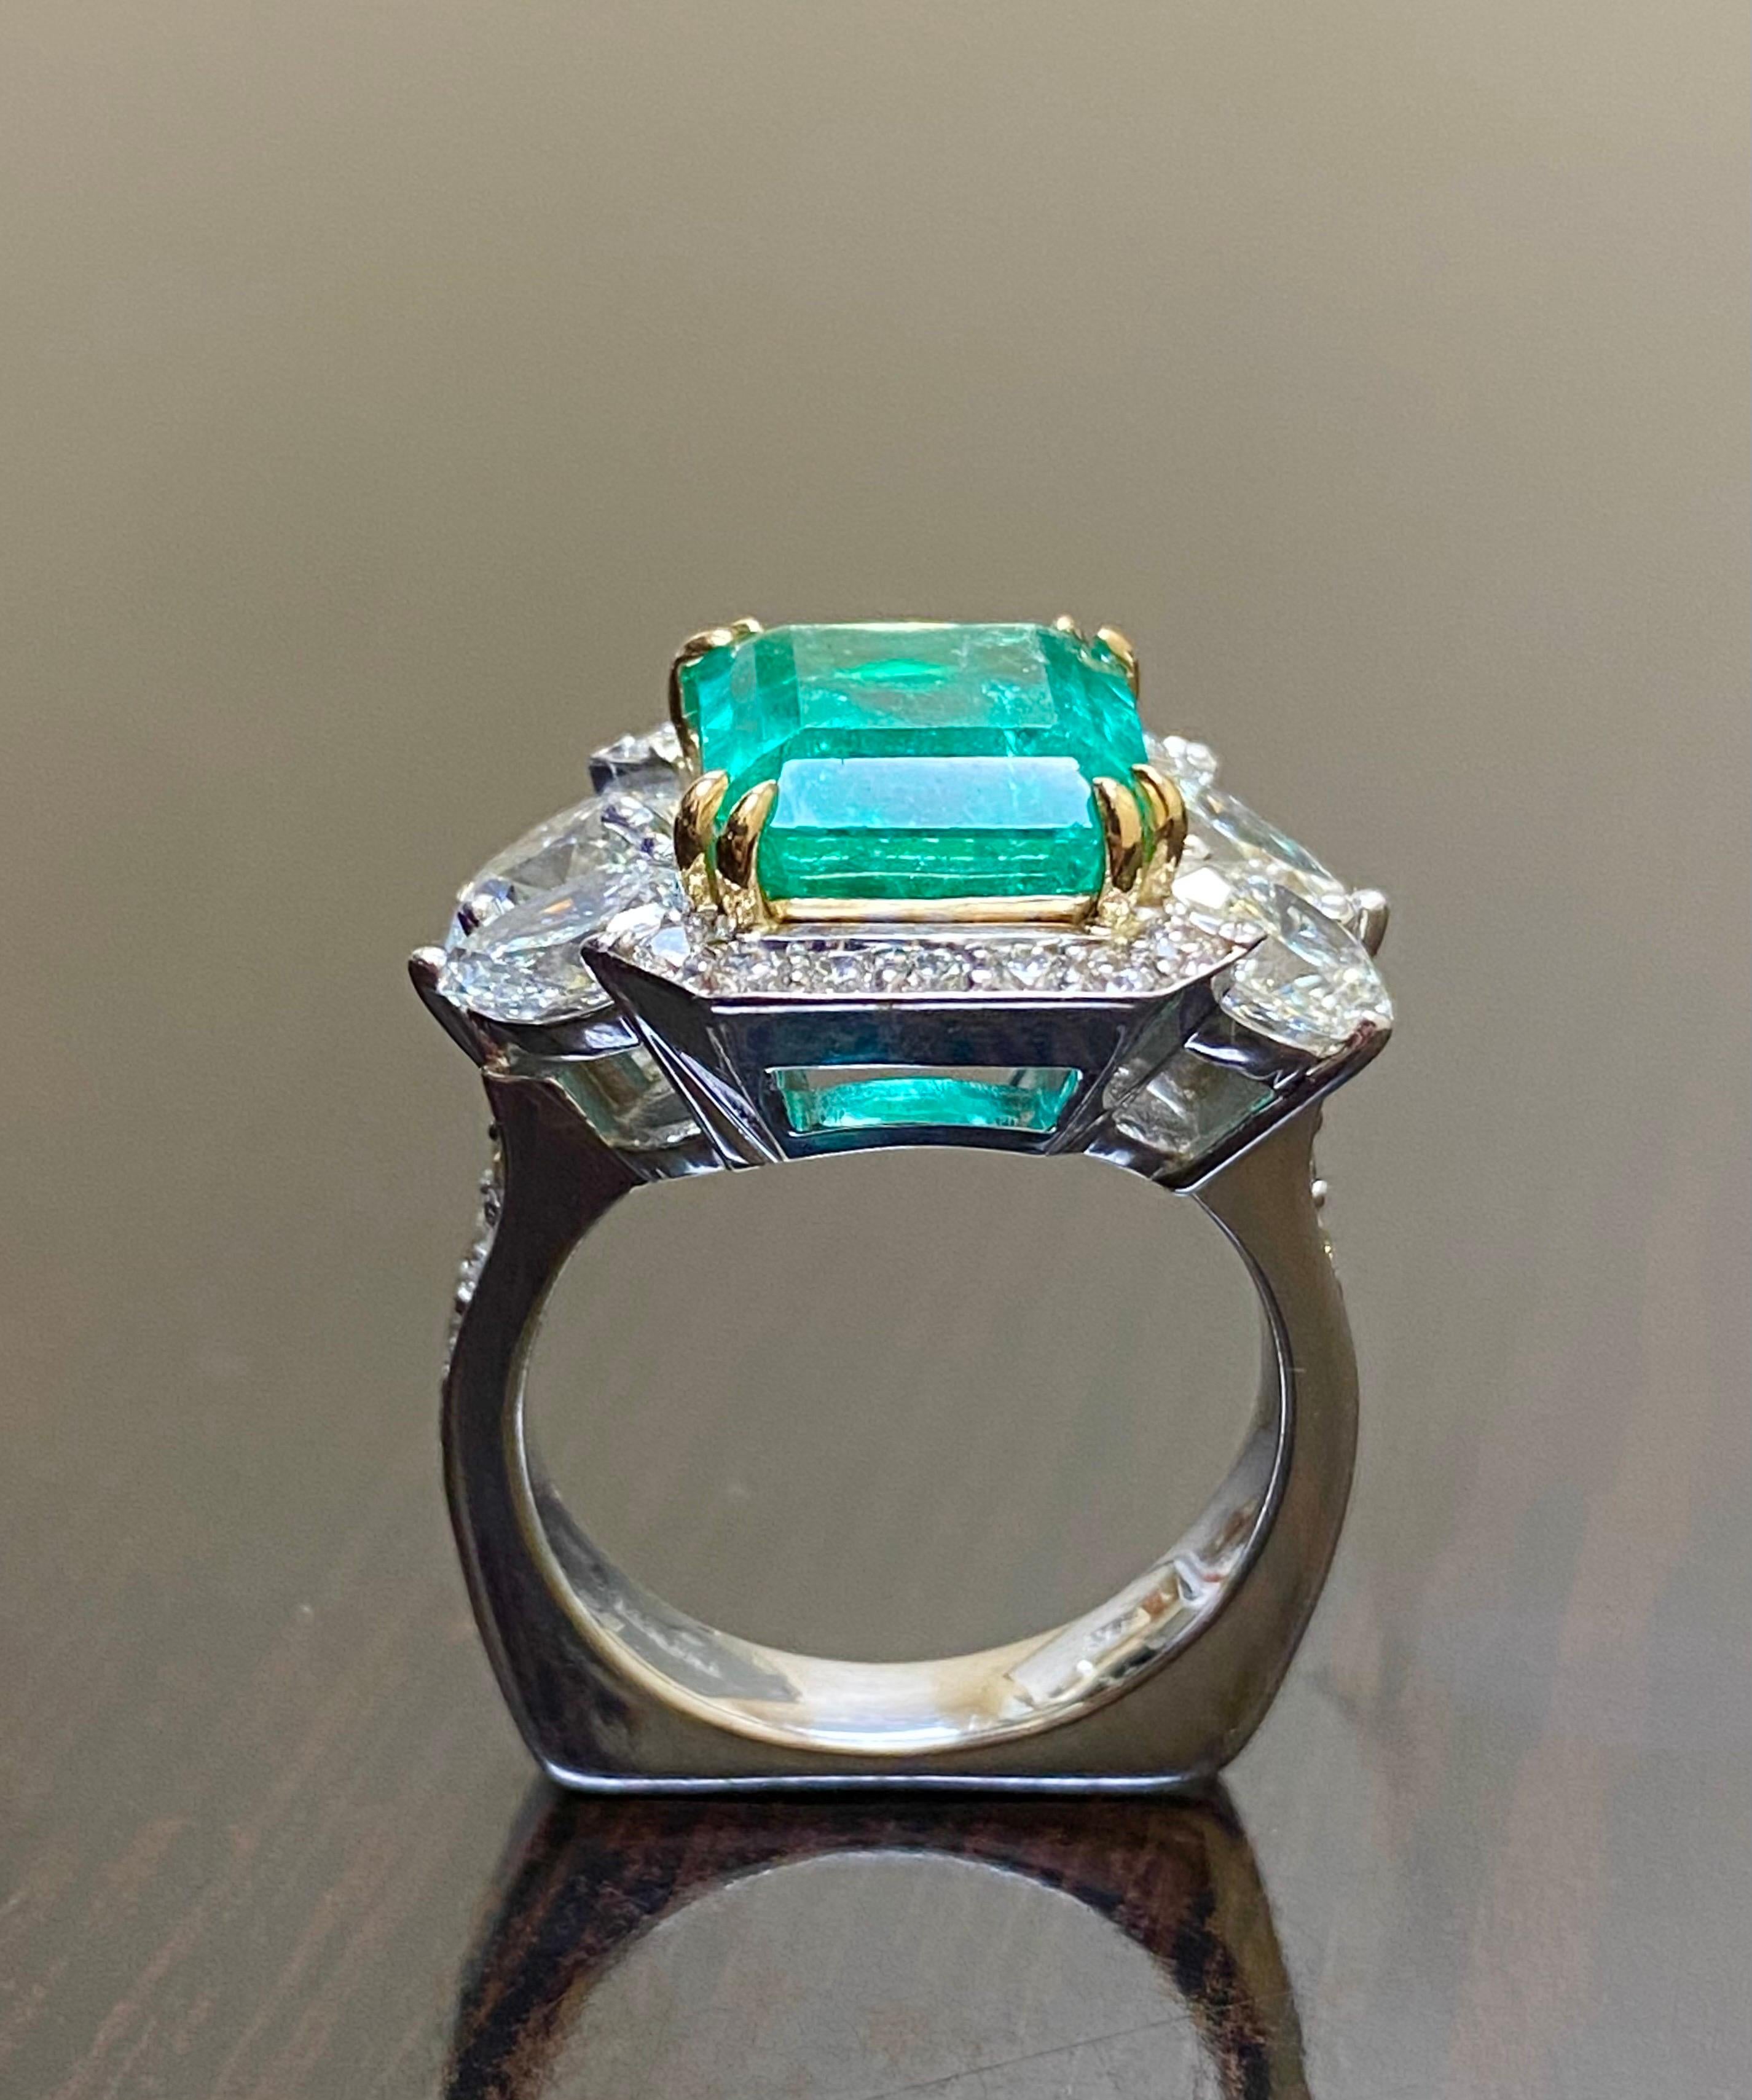 Emerald Cut 18K White Gold GIA Certified 4.87 Carat Colombian Emerald Diamond Ring For Sale